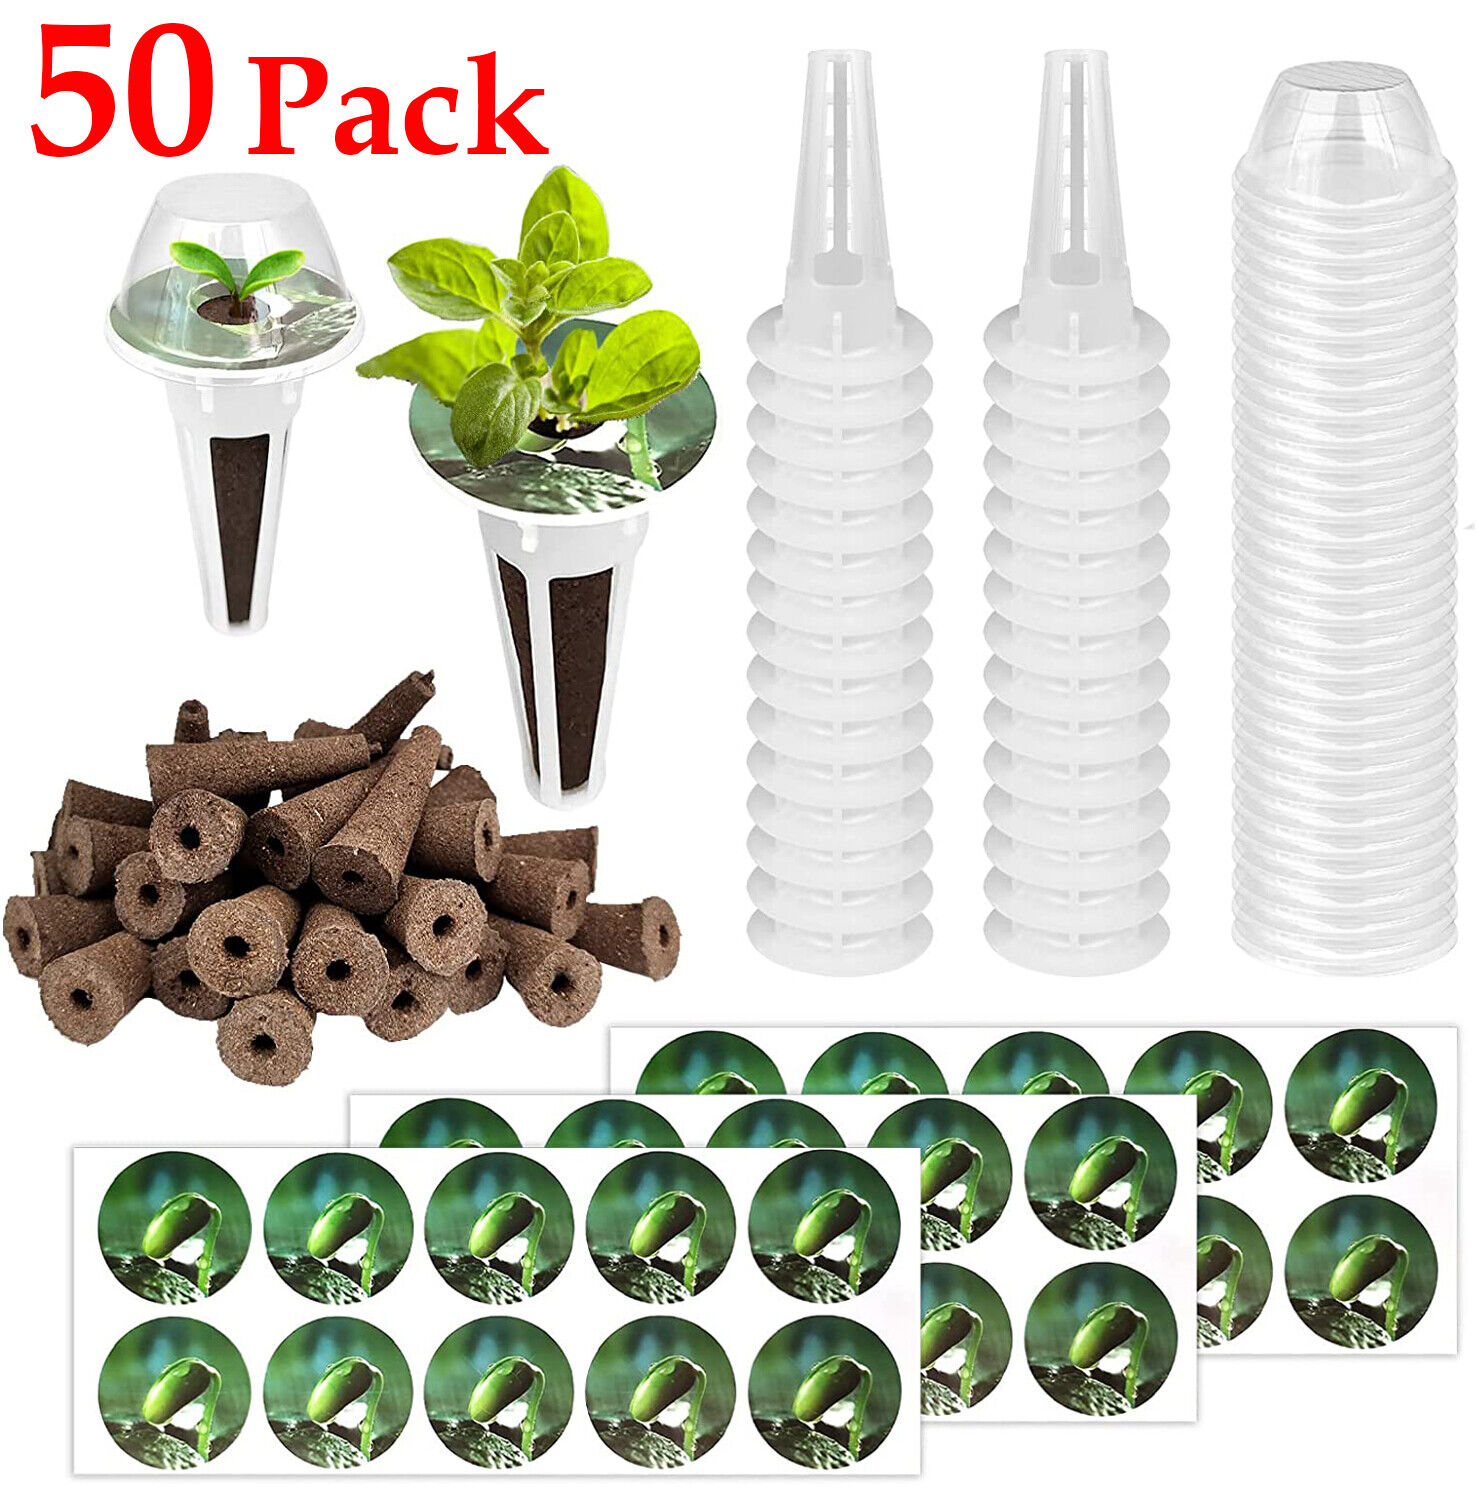 50 Pack Hydroponic-Garden System Seed-Pods Kit-50 Grow Baskets 50 Sponges & Lids